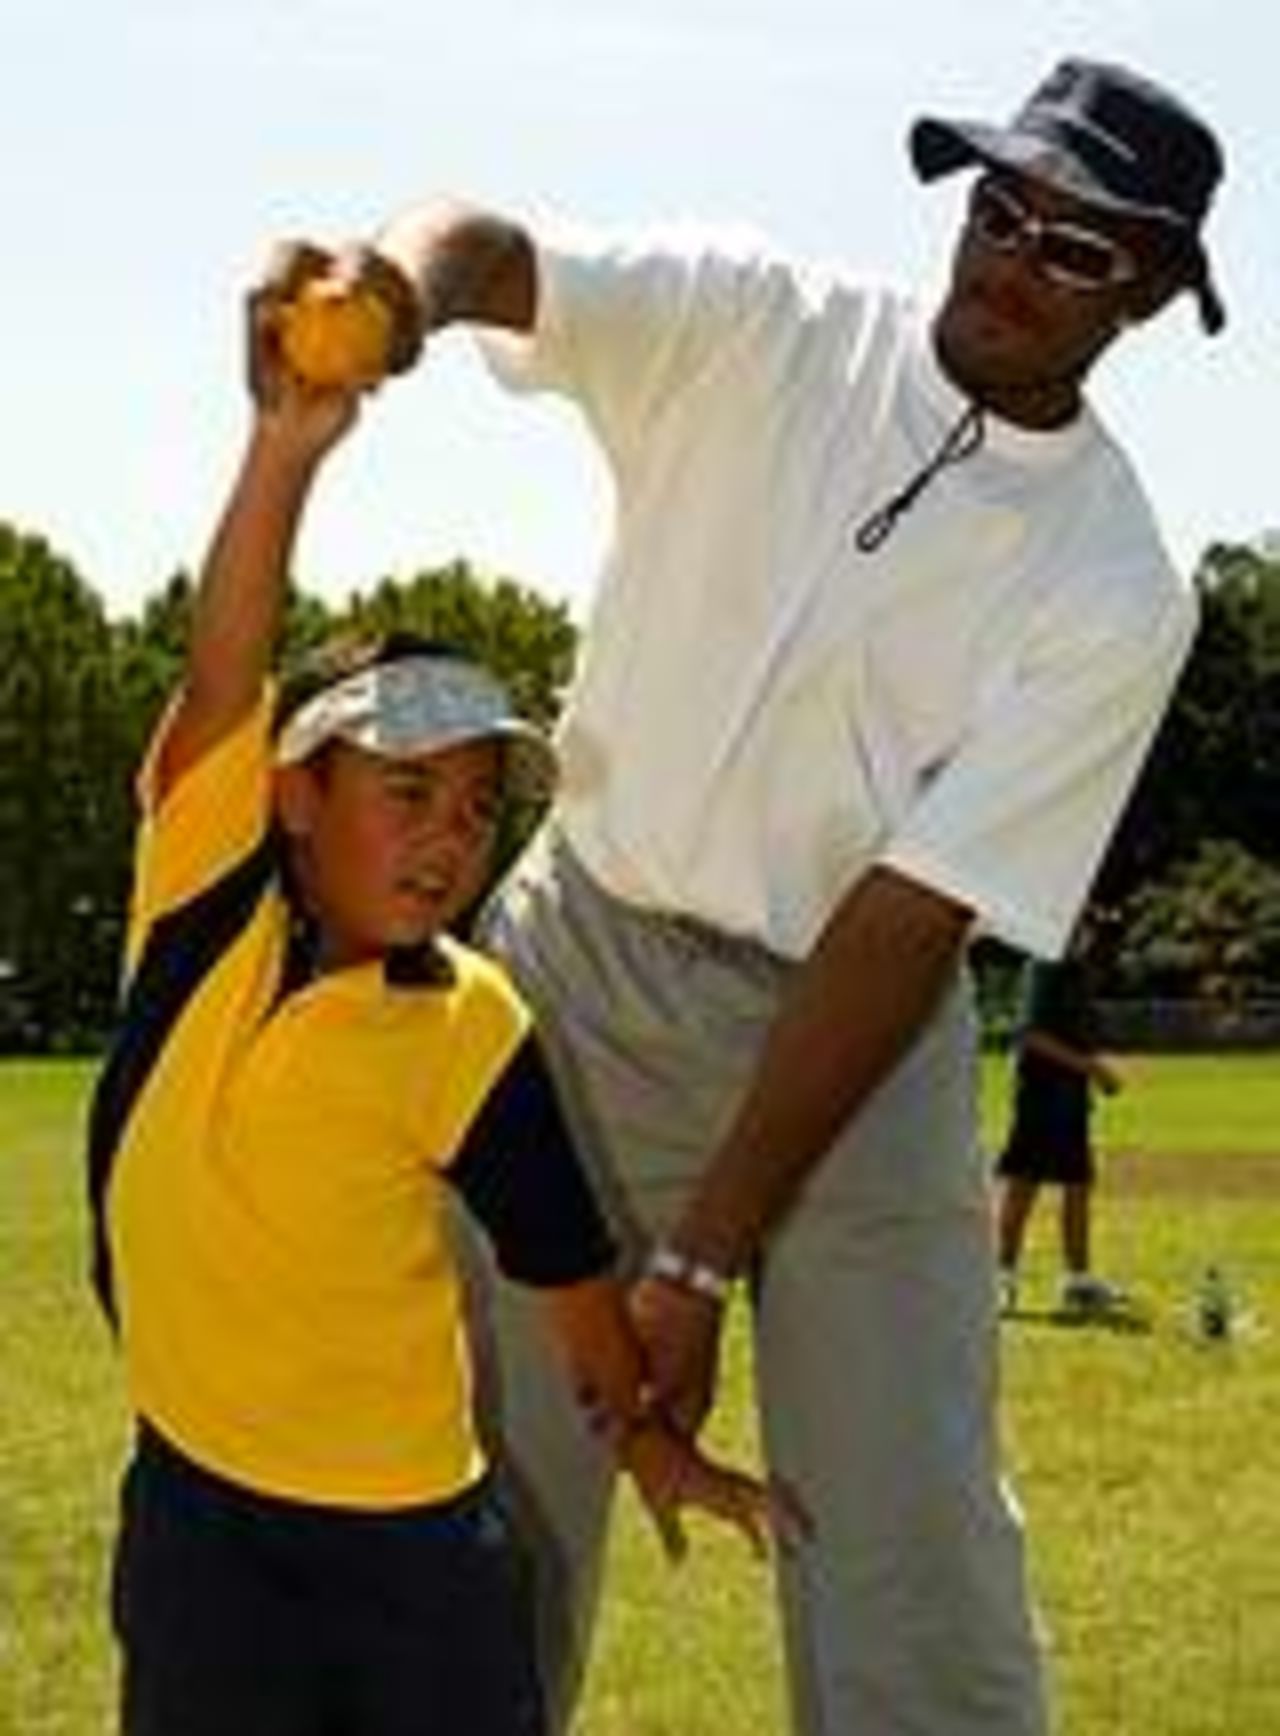 Courtney Walsh at a clinic for indigenous kids in Sydney, February 8, 2005